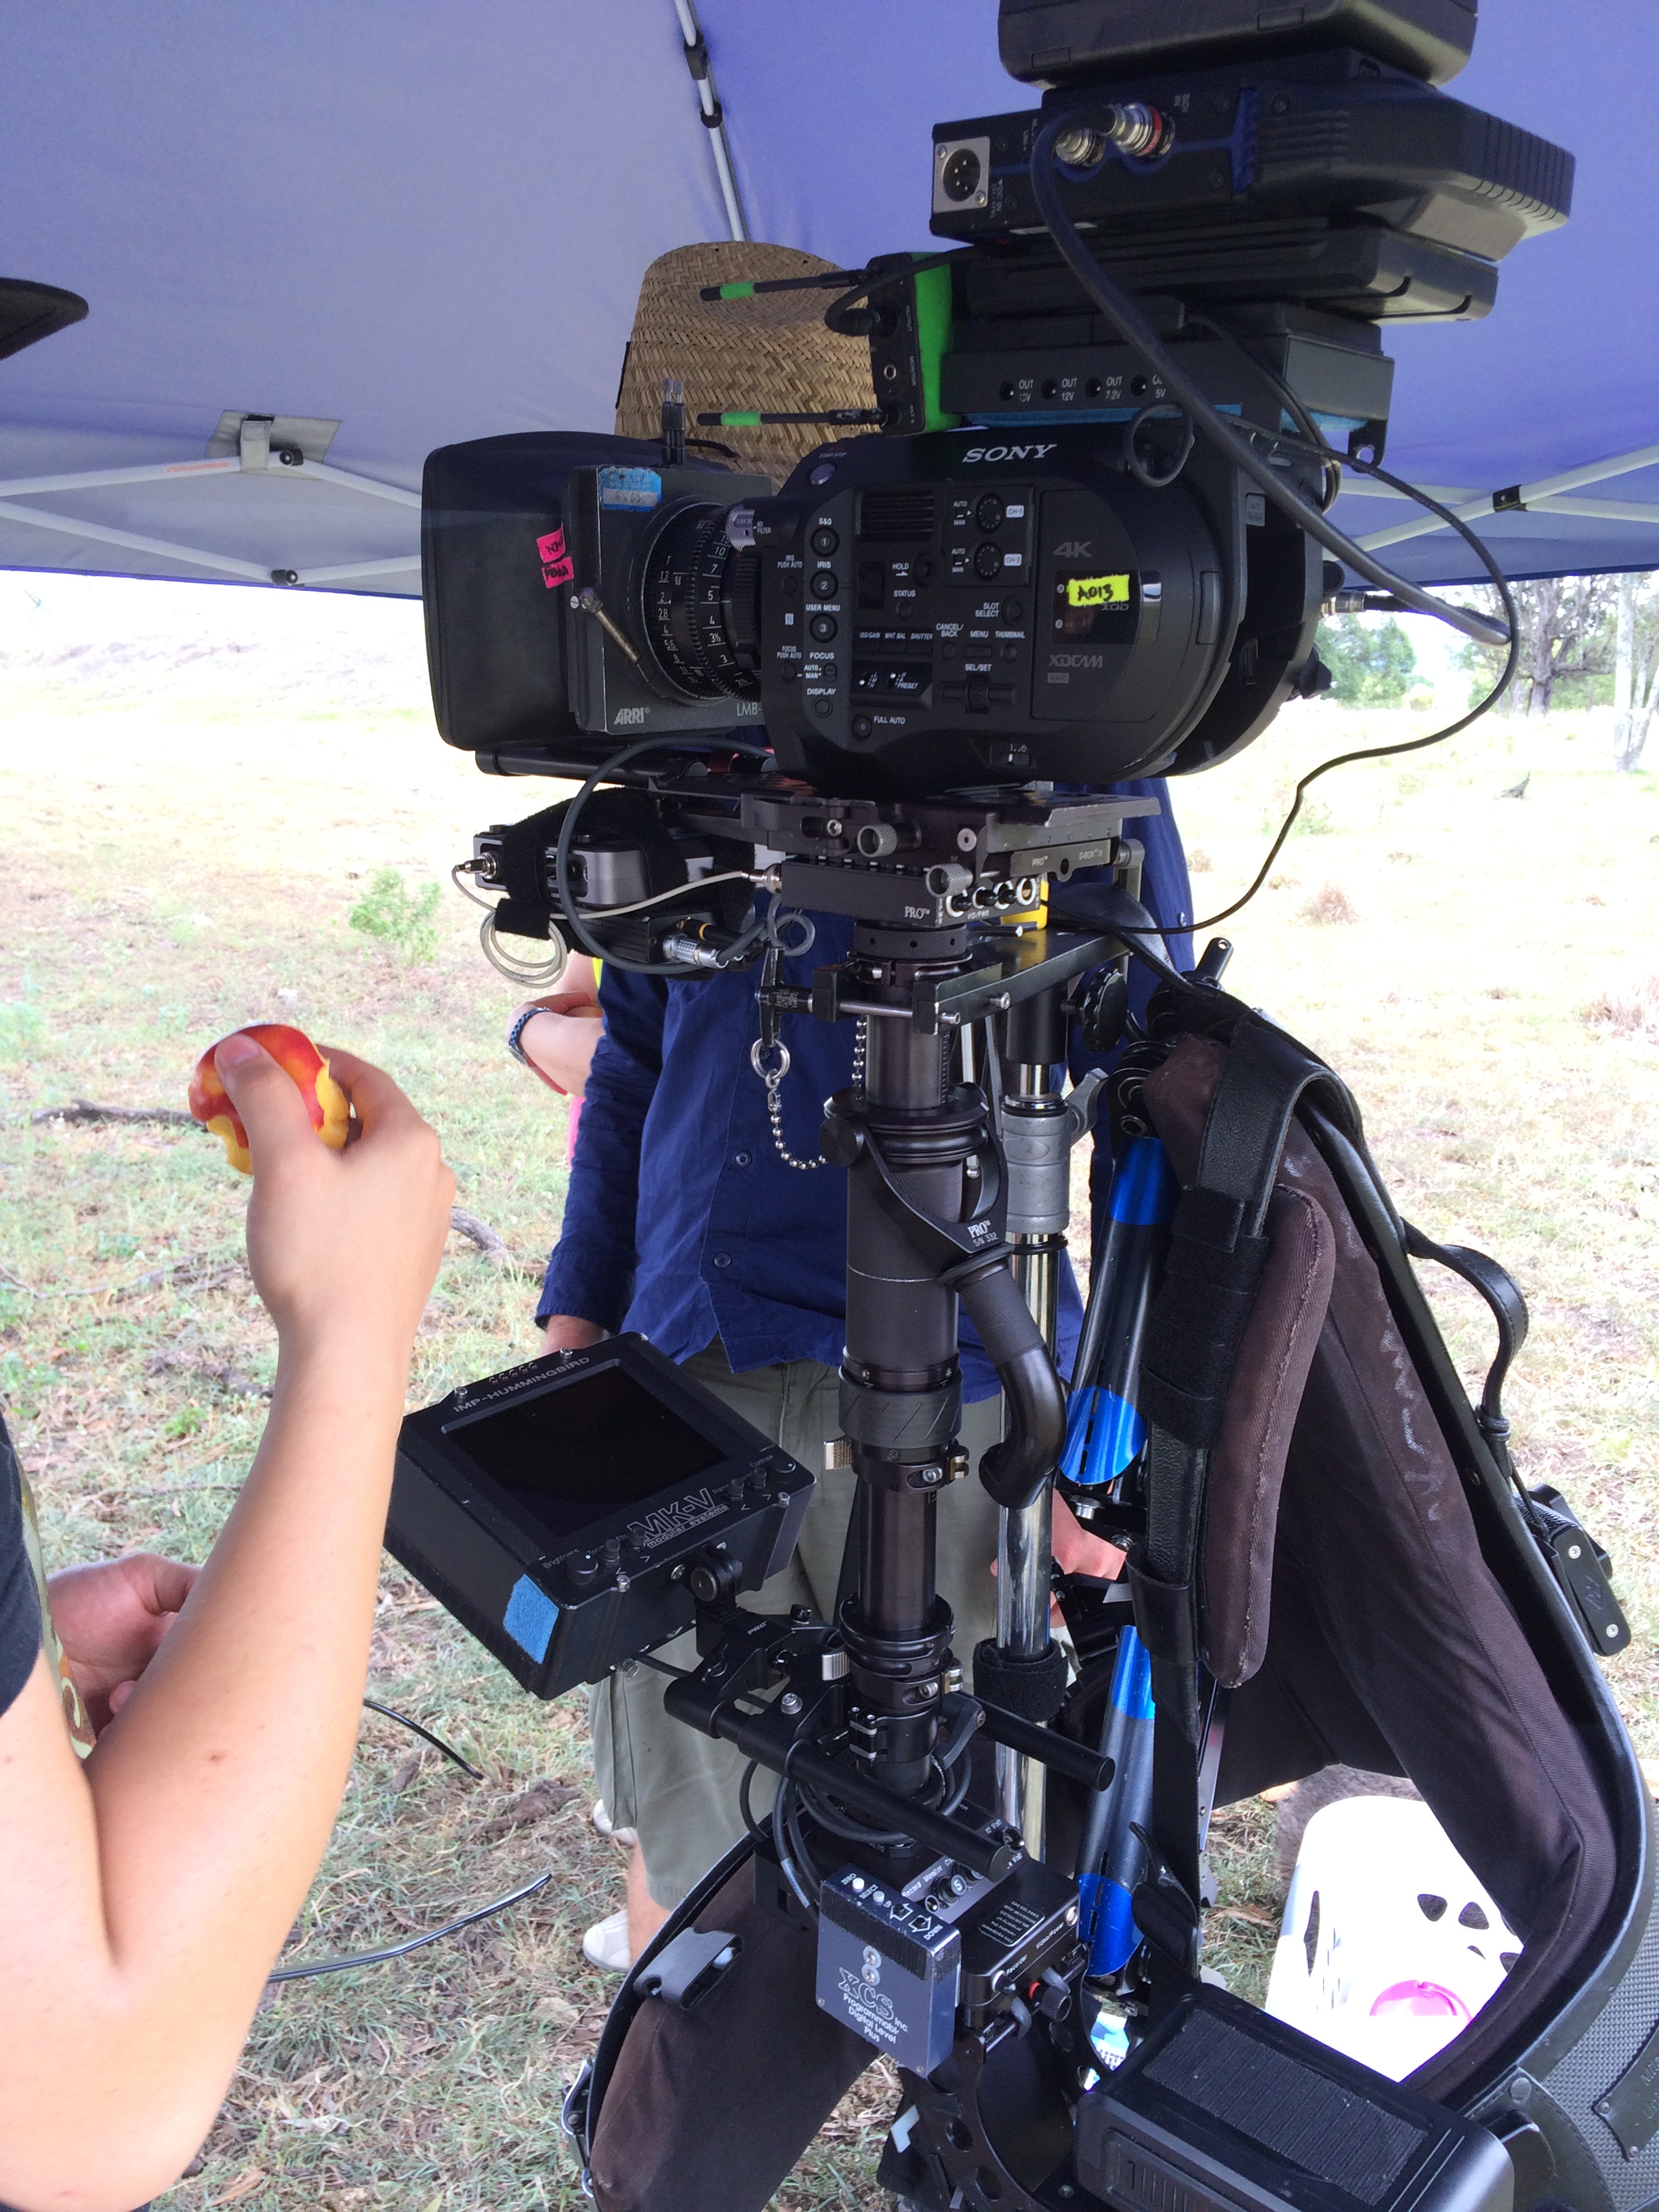 Ronin 3 axis gimbal on location